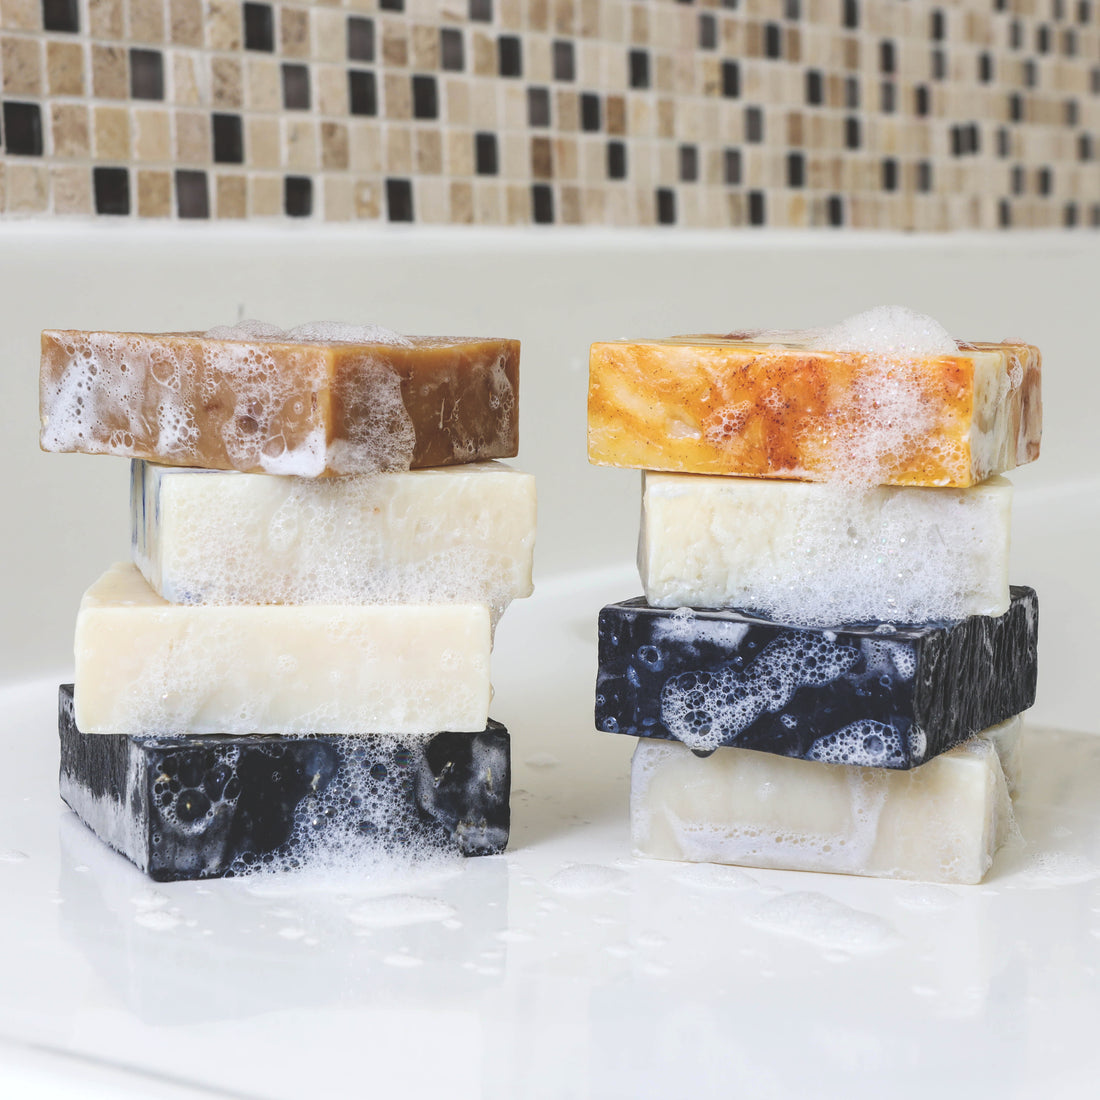 Penny-Wise and Earth-Friendly: The Economic Benefits of Using Natural Soap